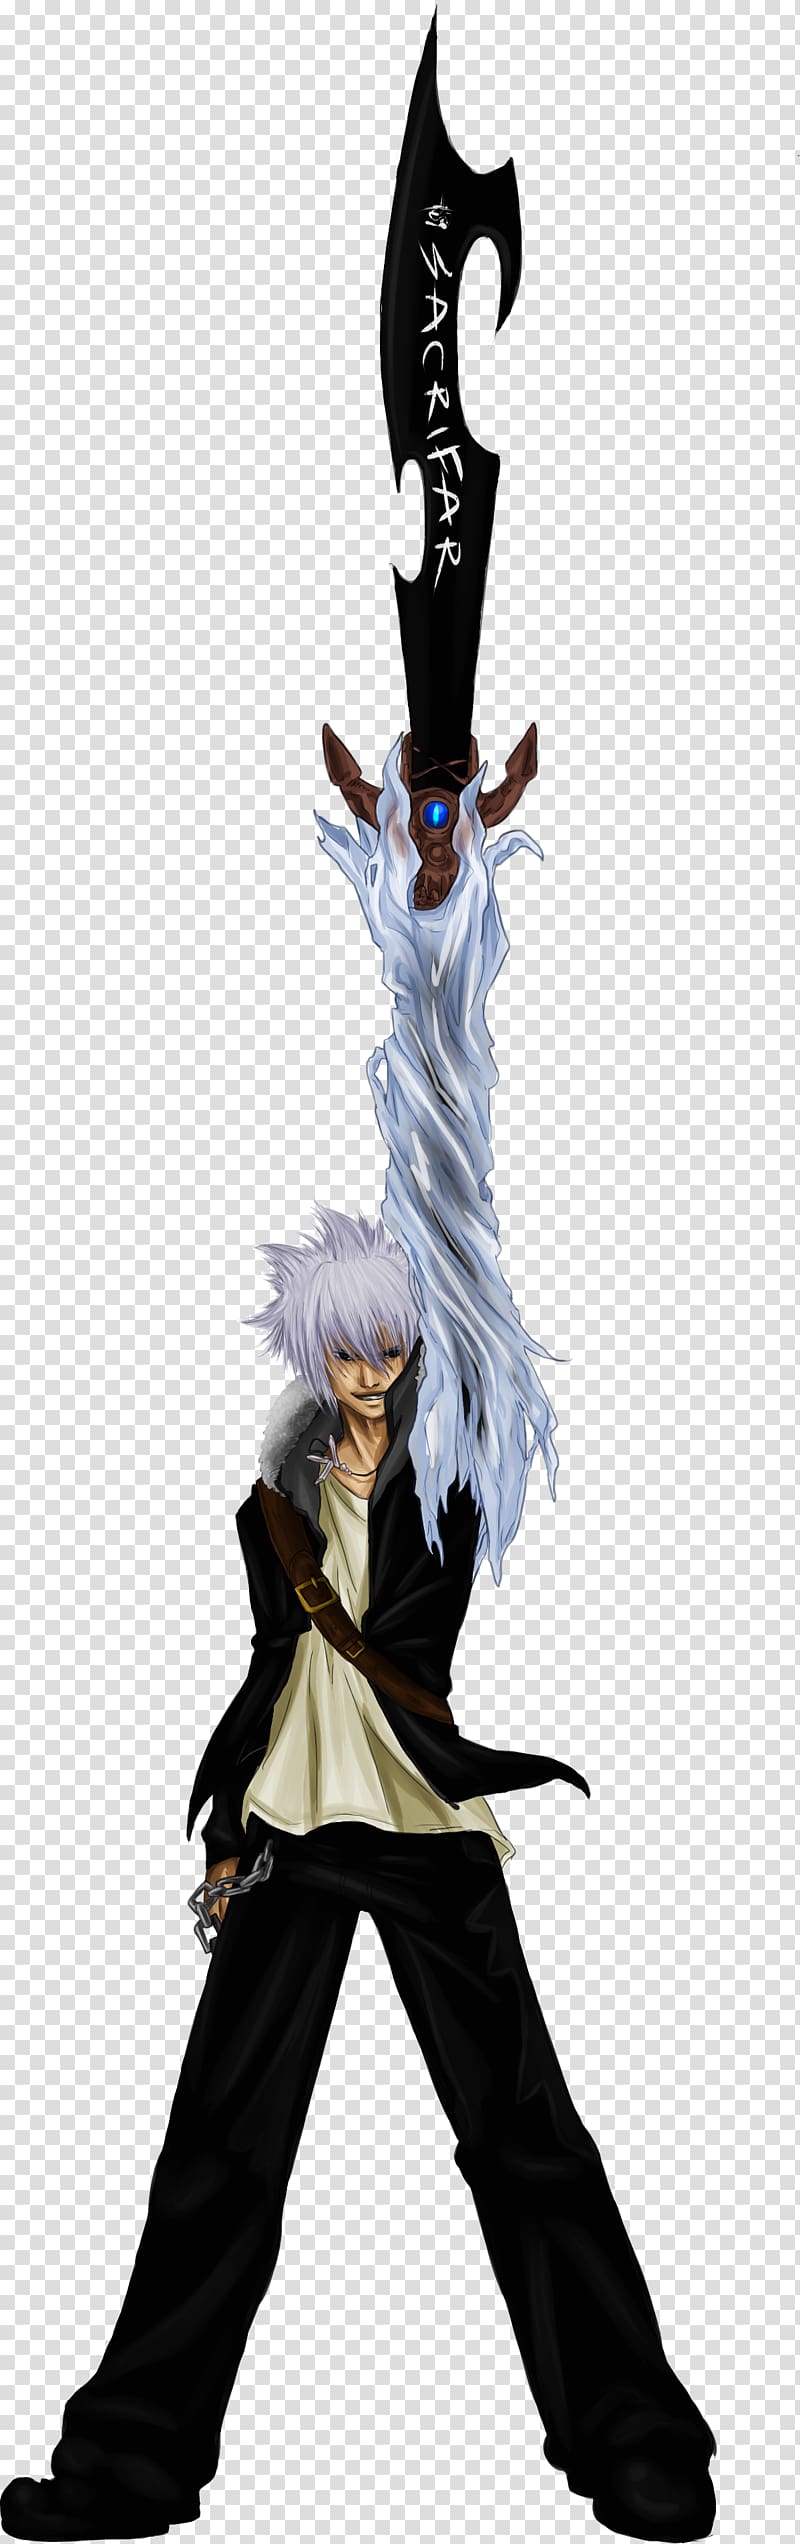 Rave Master Sword Manga Anime Fairy Tail, rave transparent background PNG clipart